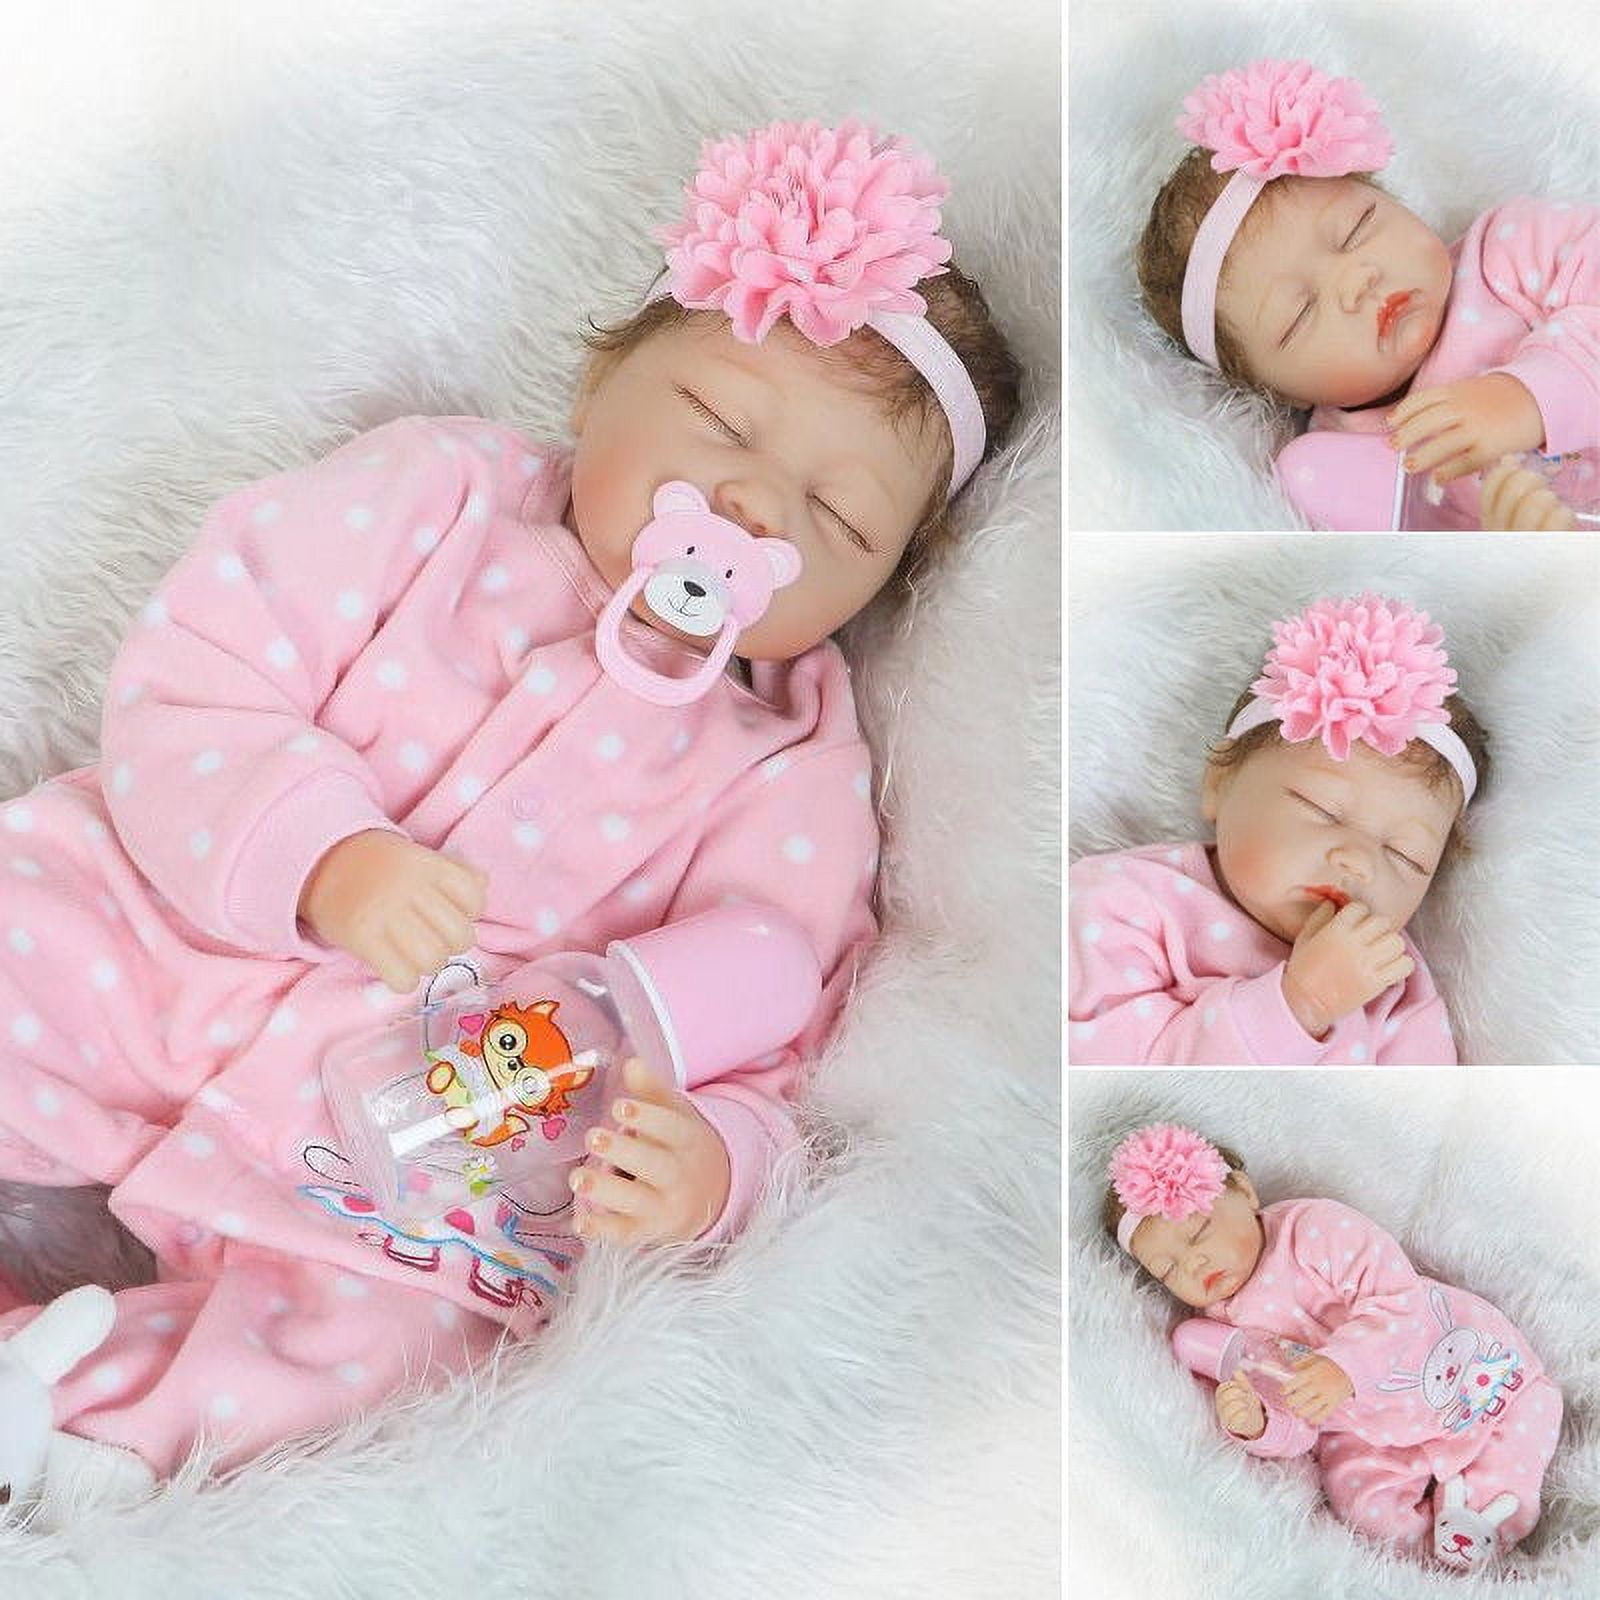 Real Lifelike Awake Super Realistic 22 Reborn Full Silicone Newborn Baby  Girls Doll that Look Real Named Stella by Babeside™